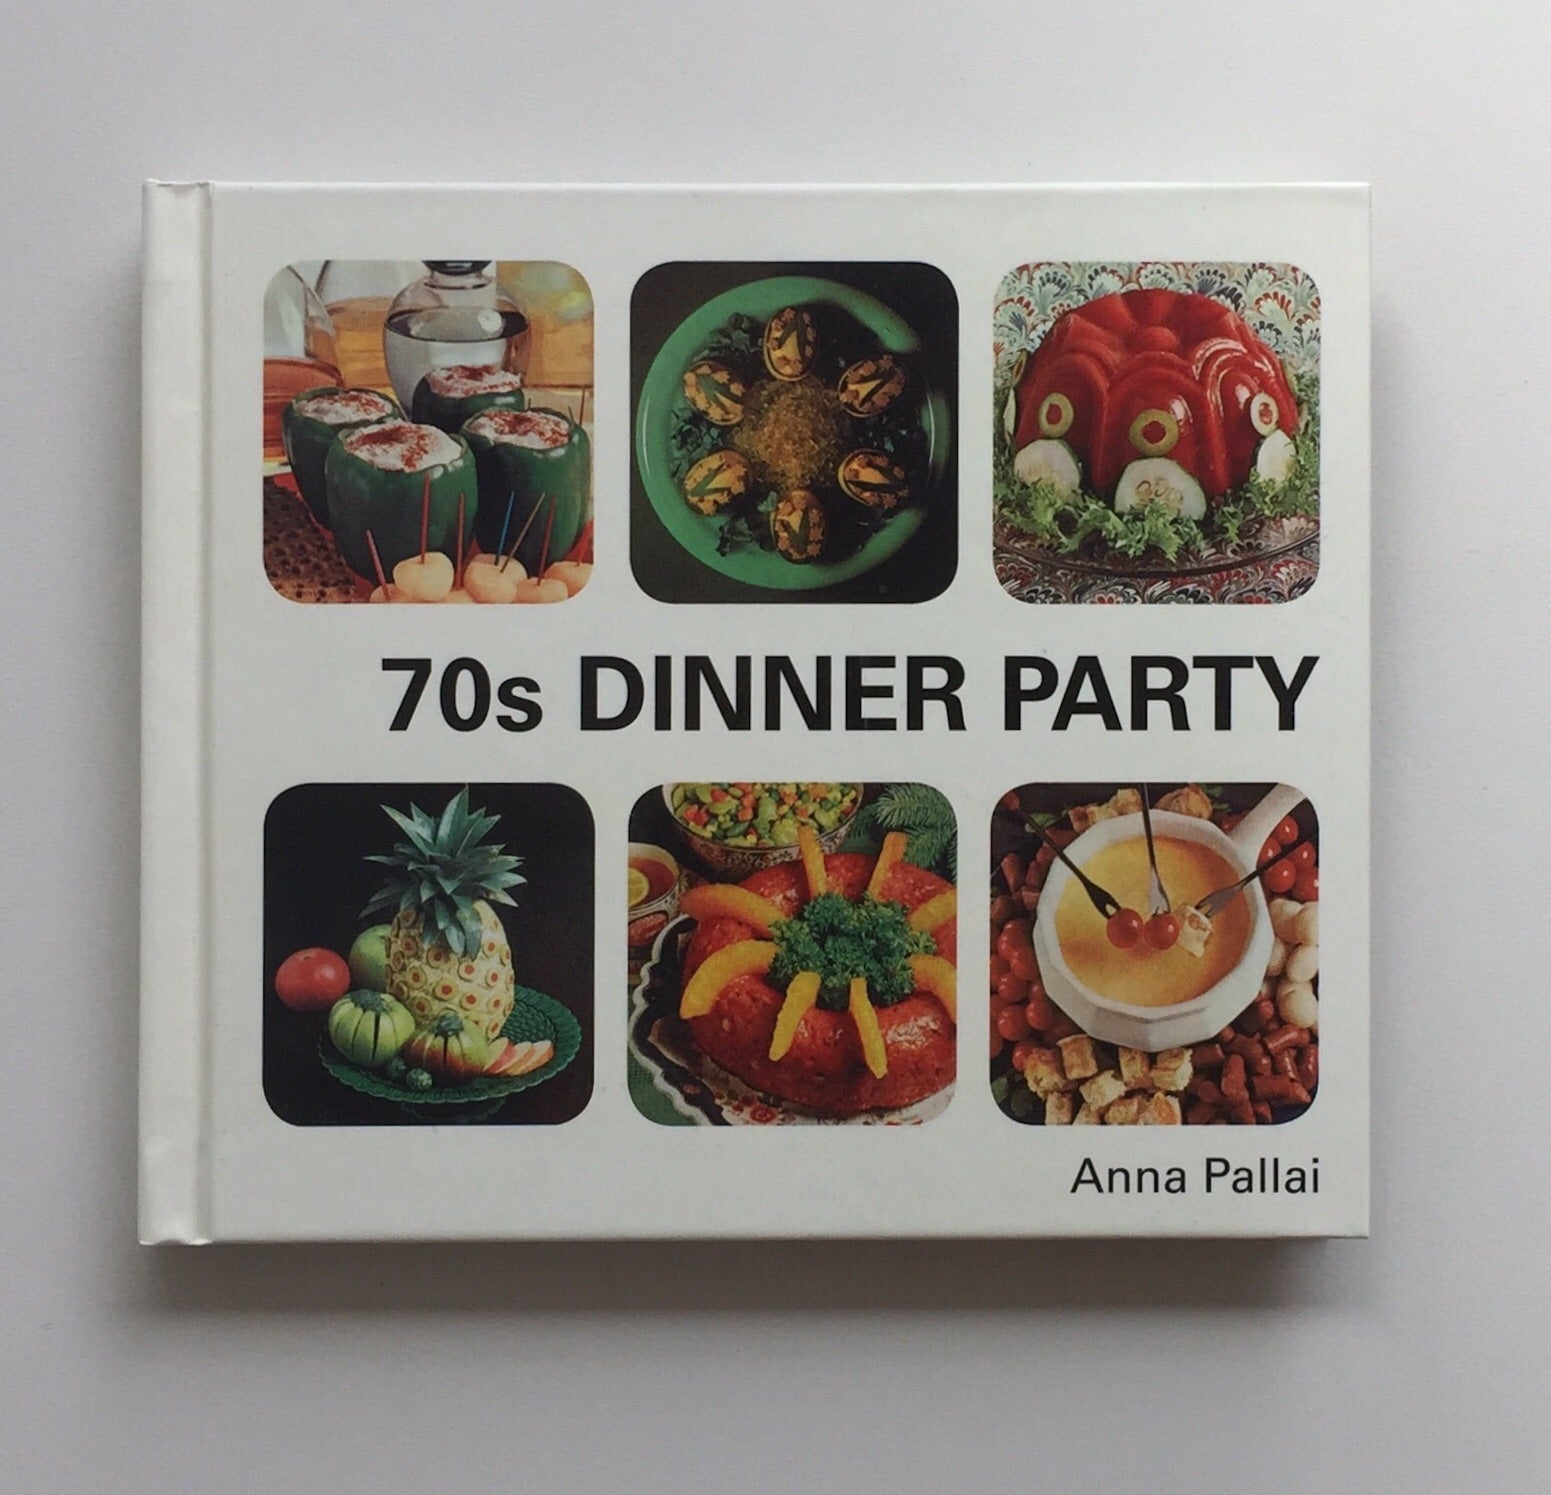 70s Dinner Party: The Good, the Bad and the Downright Ugly of Retro Food by Anna Pallai